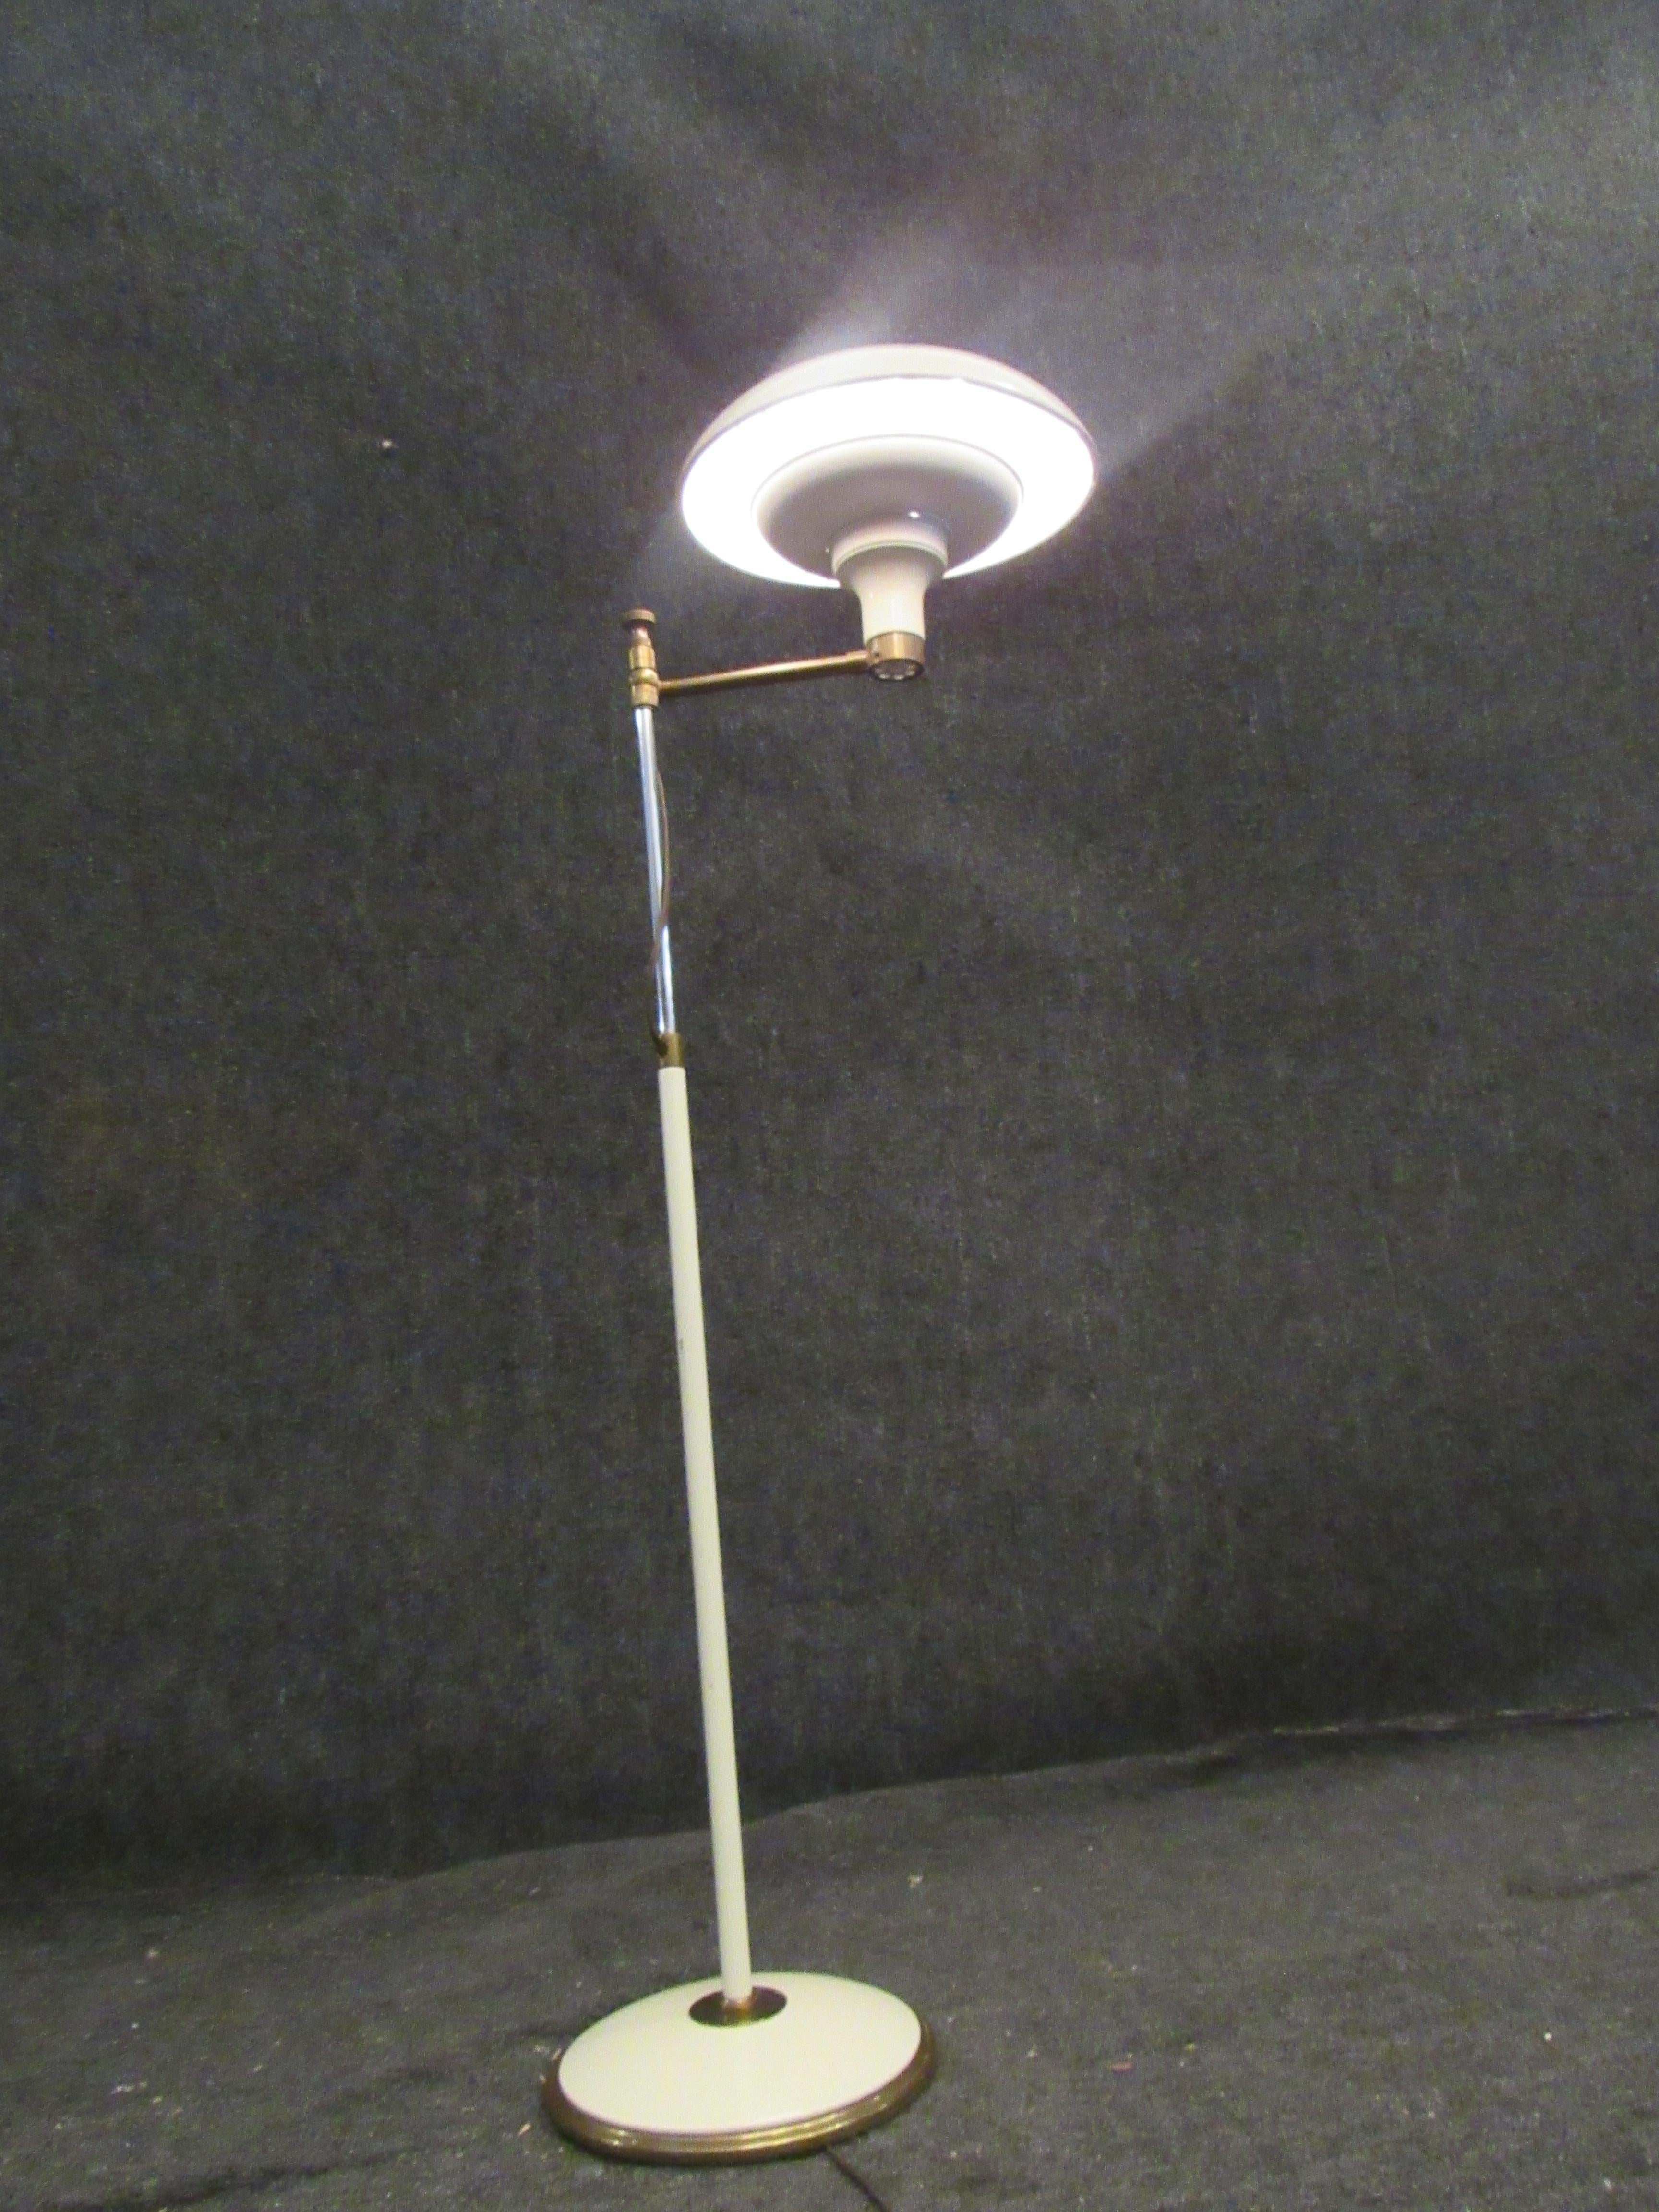 Amazing vintage Italian brass floor lamp with a unique adjustable height arm. A 12